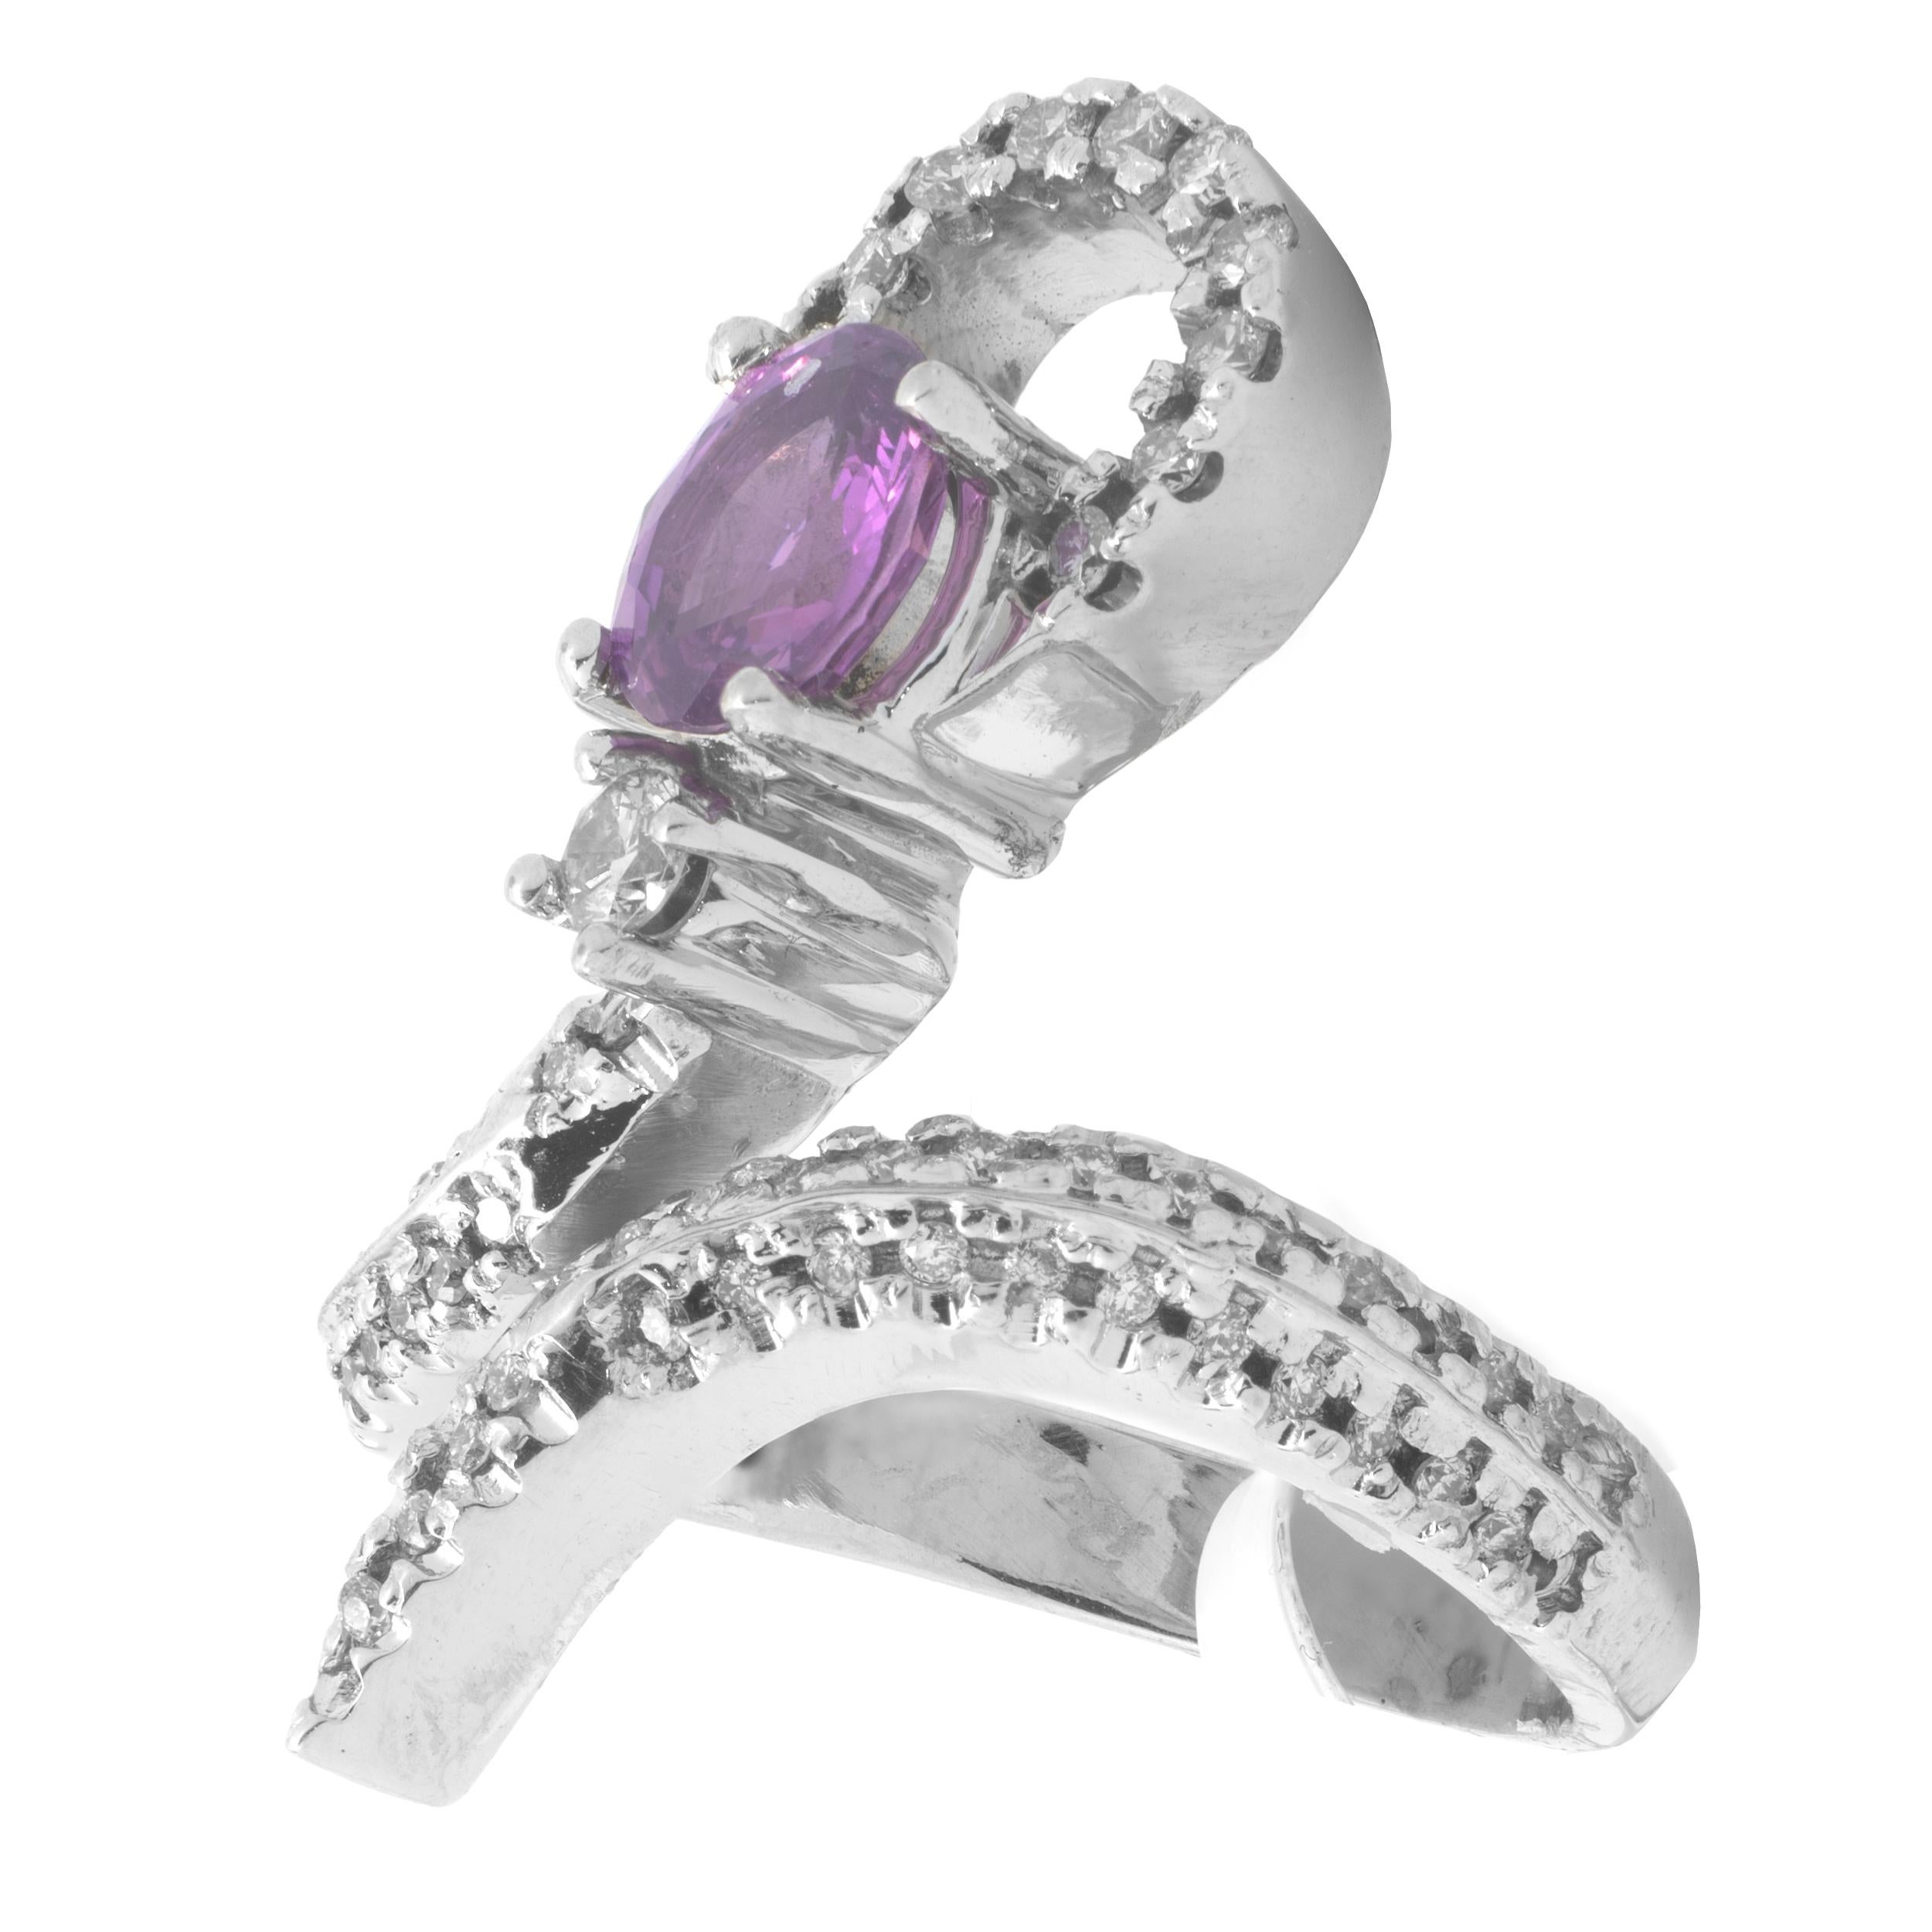 Material: 14K white gold
Diamond: round brilliant cut = .90cttw
Color: G
Clarity: SI1
Pink Sapphire: 1 pear cut = 1.00ct
Ring Size: 7 (please allow up to 2 additional business days for sizing requests)
Dimensions: ring top measures 28.60mm
Weight: